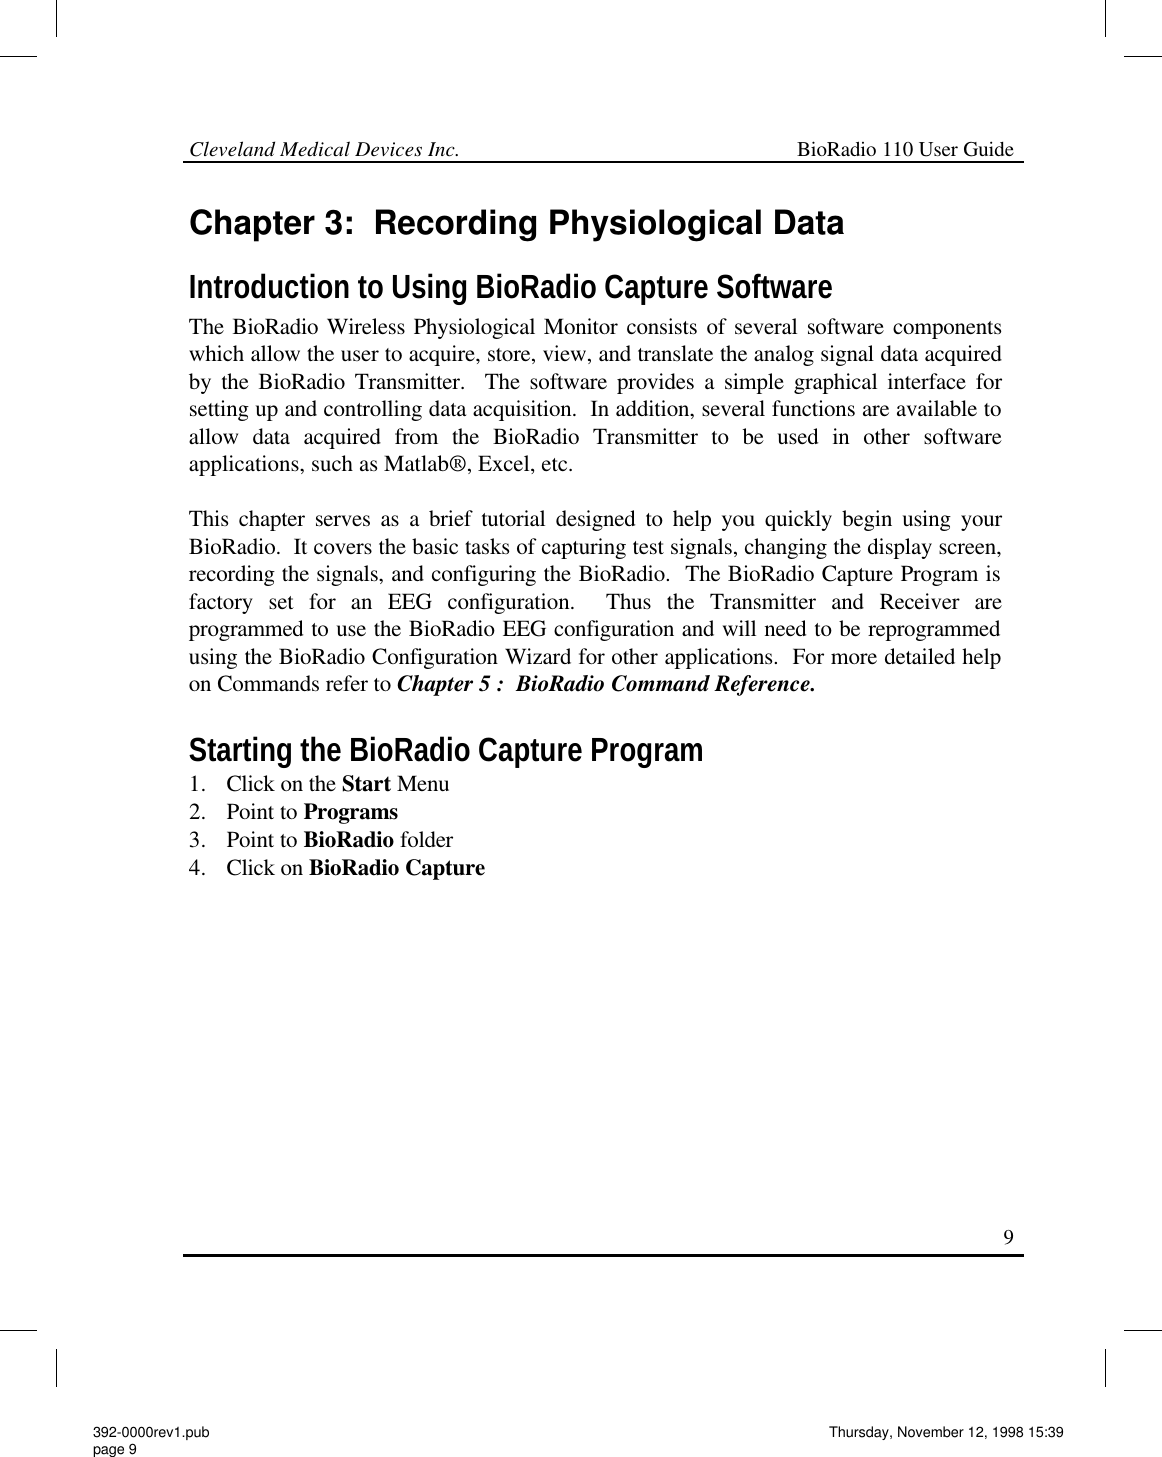 Cleveland Medical Devices Inc.                                                             BioRadio 110 User Guide                                                                                                                                                     9 Chapter 3:  Recording Physiological Data Introduction to Using BioRadio Capture Software The BioRadio Wireless Physiological Monitor consists of several software components which allow the user to acquire, store, view, and translate the analog signal data acquired by the BioRadio Transmitter.  The software provides a simple graphical interface for setting up and controlling data acquisition.  In addition, several functions are available to allow data acquired from the BioRadio Transmitter to be used in other software applications, such as Matlab®, Excel, etc.  This chapter serves as a brief tutorial designed to help you quickly begin using your BioRadio.  It covers the basic tasks of capturing test signals, changing the display screen, recording the signals, and configuring the BioRadio.  The BioRadio Capture Program is factory set for an EEG configuration.  Thus the Transmitter and Receiver are programmed to use the BioRadio EEG configuration and will need to be reprogrammed using the BioRadio Configuration Wizard for other applications.  For more detailed help on Commands refer to Chapter 5 :  BioRadio Command Reference.  Starting the BioRadio Capture Program 1. Click on the Start Menu 2. Point to Programs 3. Point to BioRadio folder 4. Click on BioRadio Capture    392-0000rev1.pub page 9 Thursday, November 12, 1998 15:39 